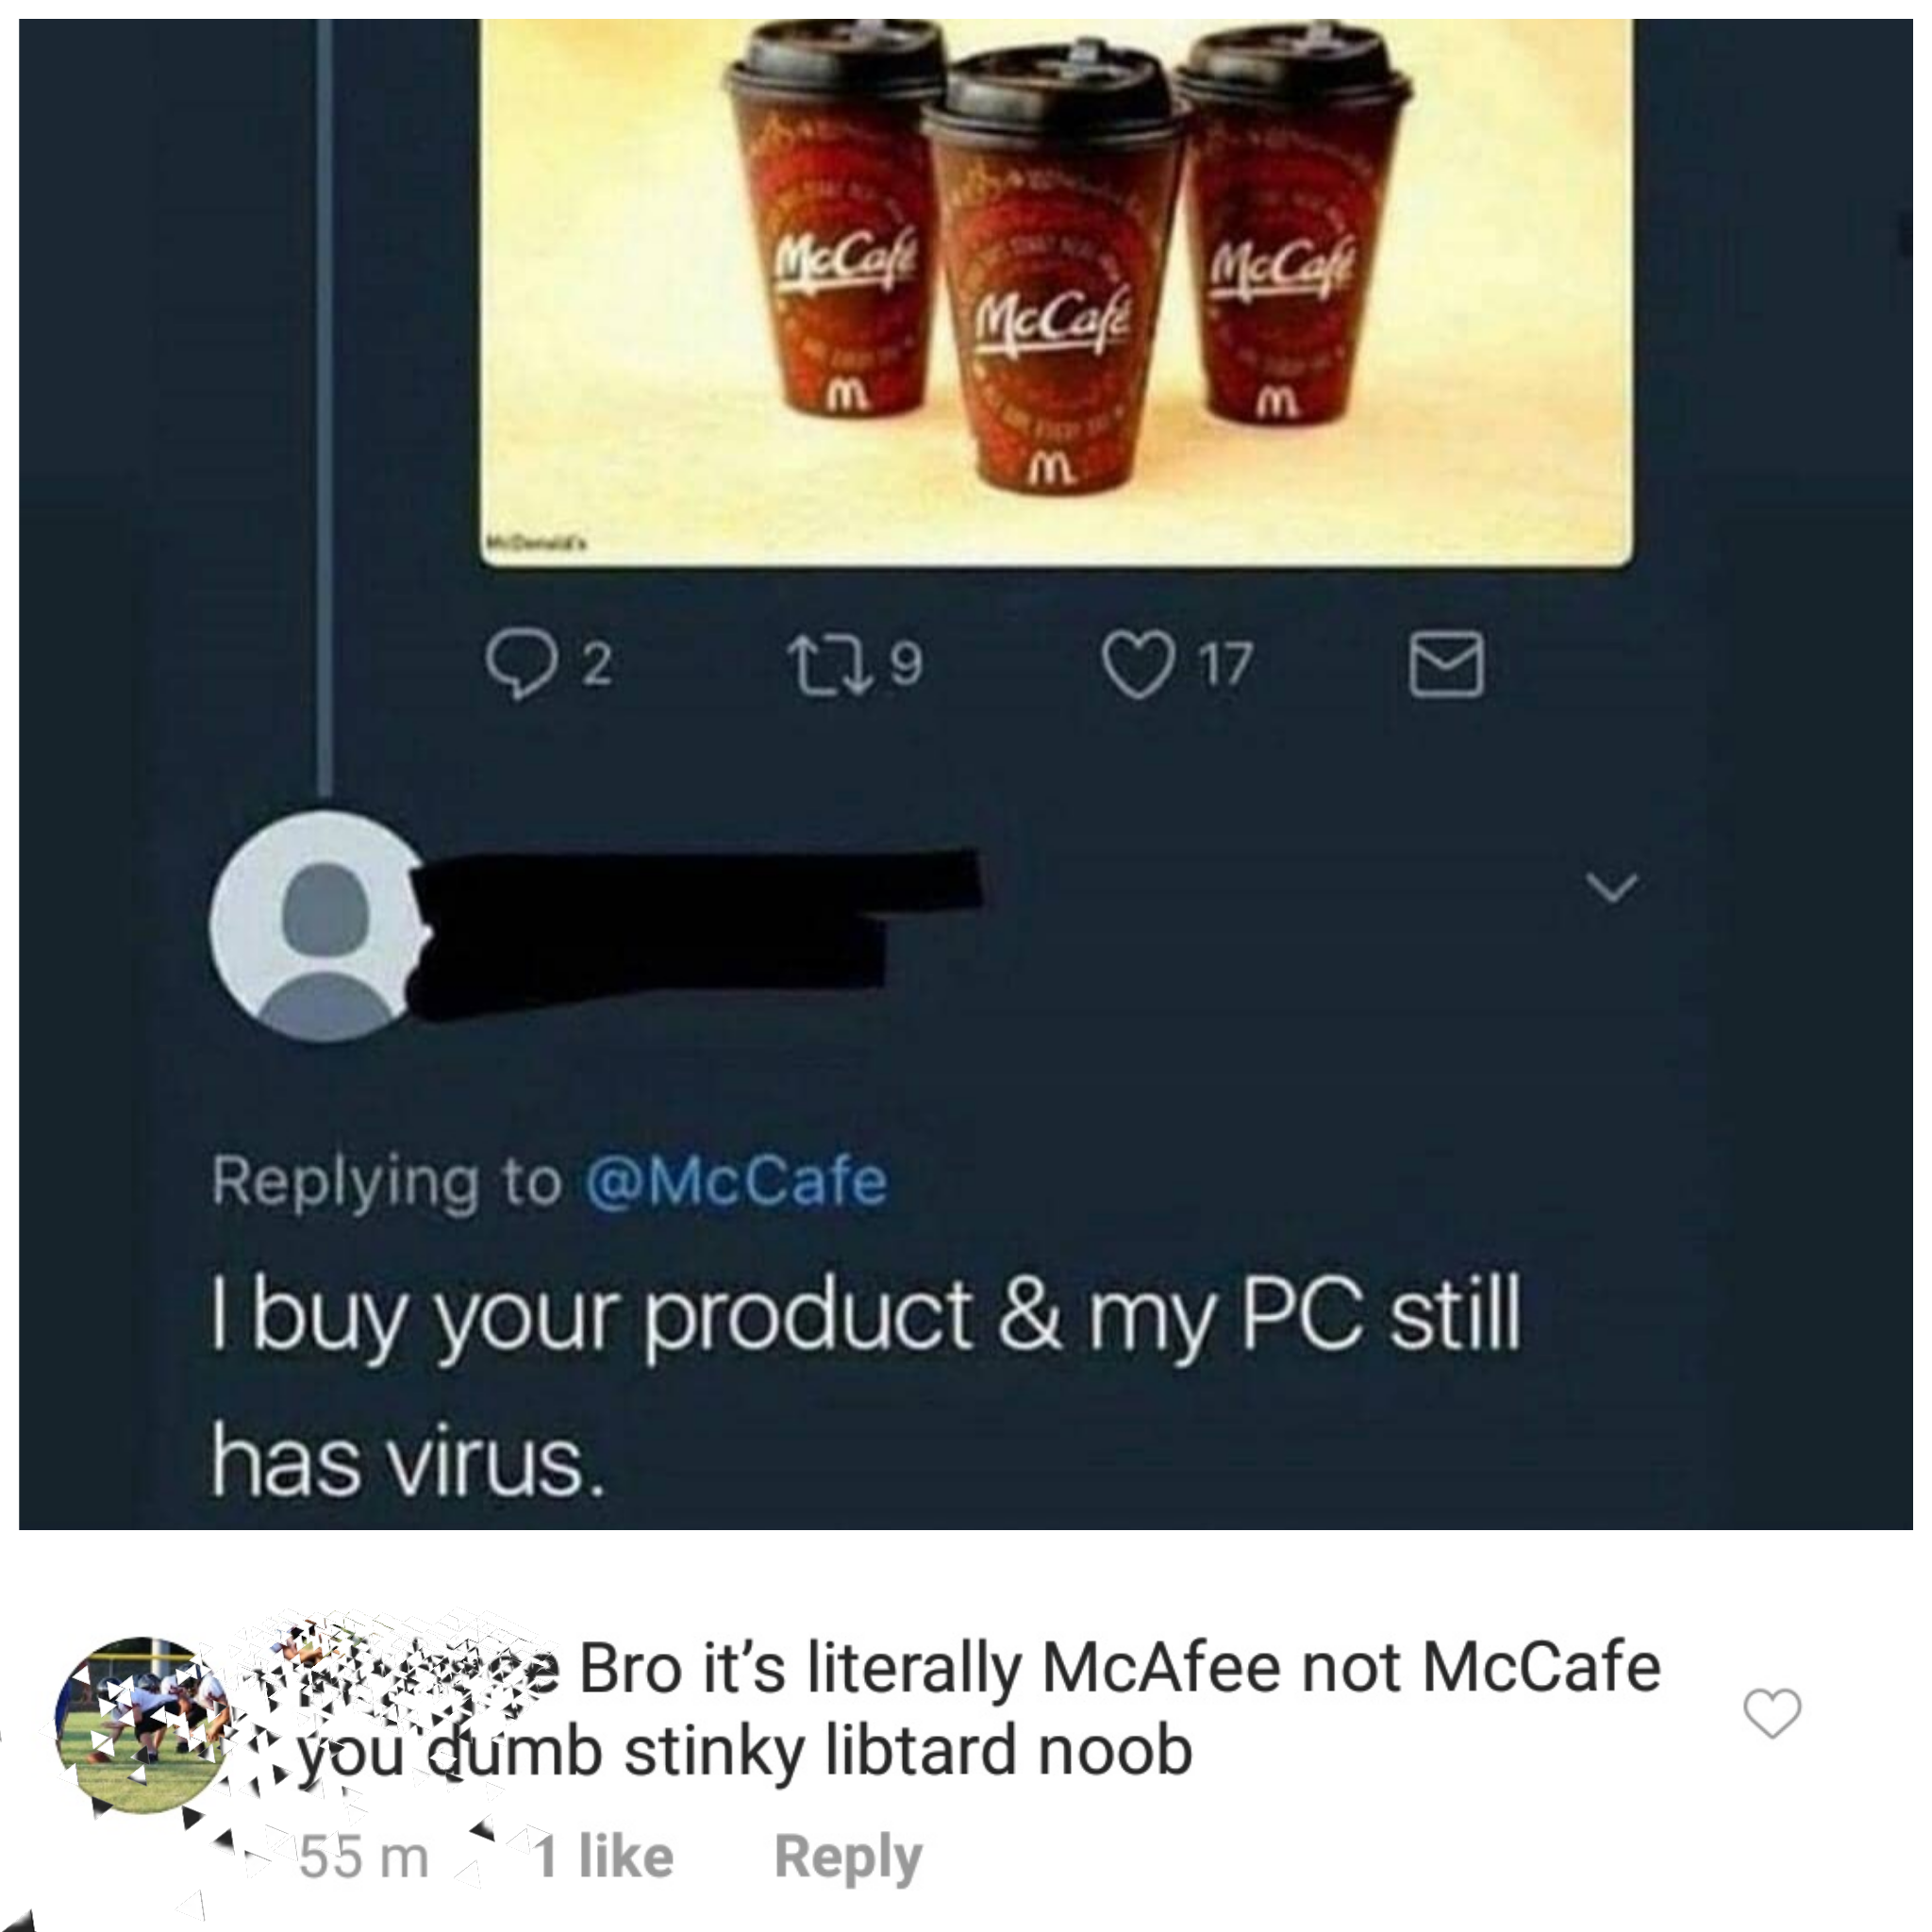 missed - mccafe virus - 02 279 017 I buy your product & my Pc still, has virus. egzace Bro it's literally McAfee not McCafe you dumb stinky libtard noob 55 m 1